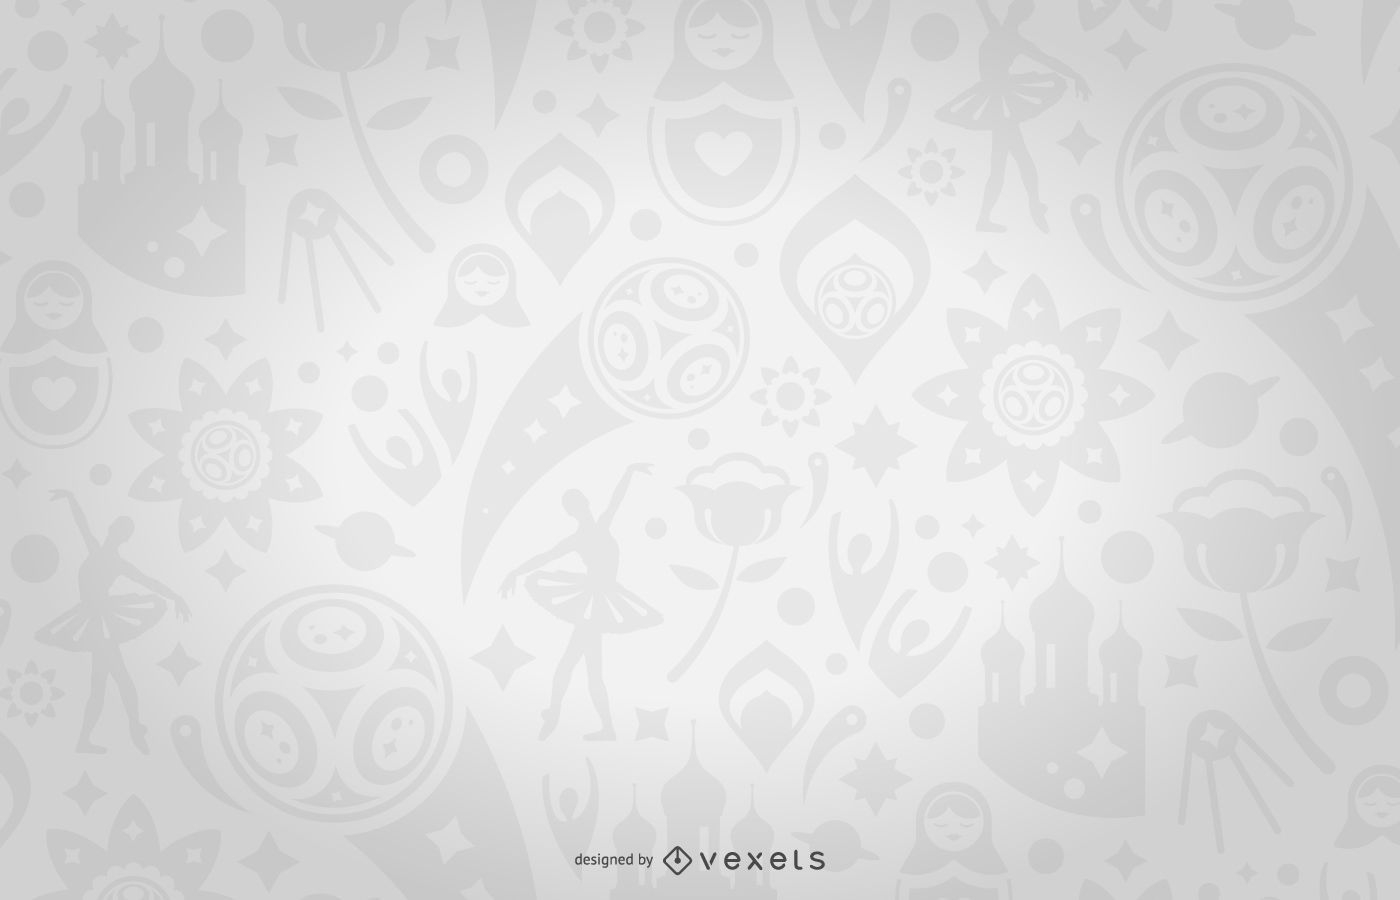 Russia 2018 seamless pattern in gray